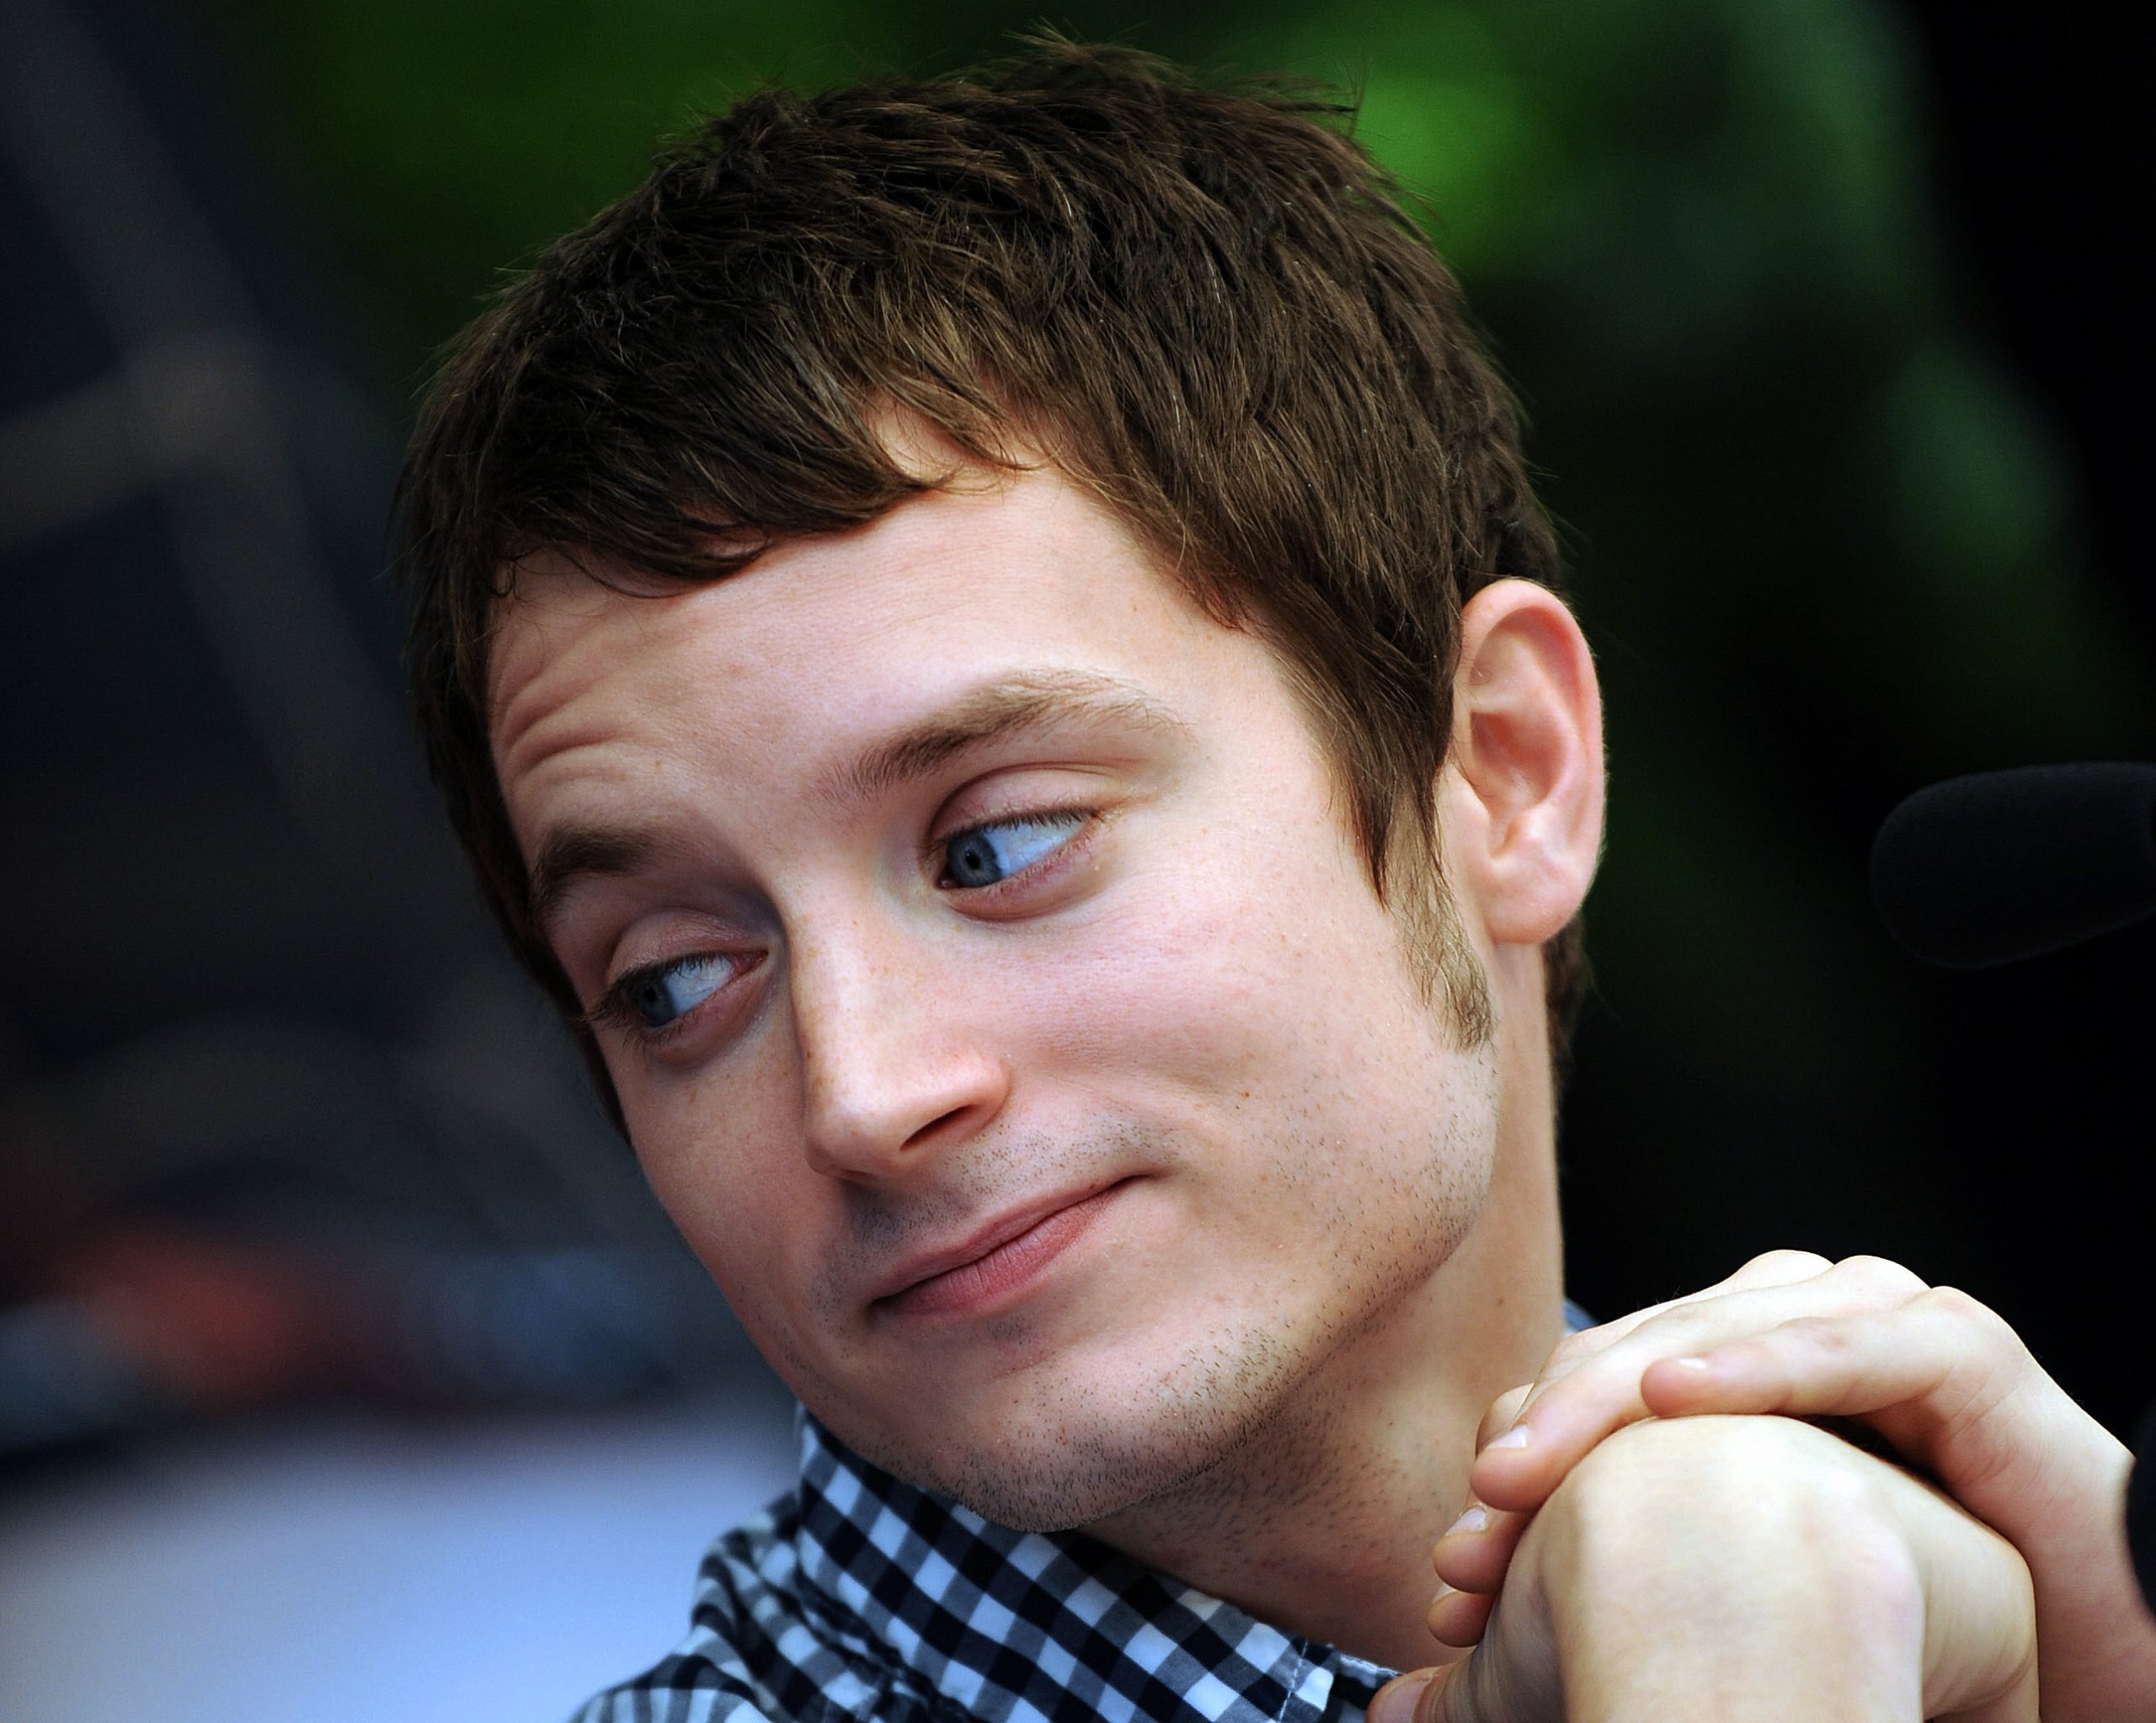 ‘Lord of the Rings’: Elijah Wood has 1 Big Problem With the Amazon Prime Series